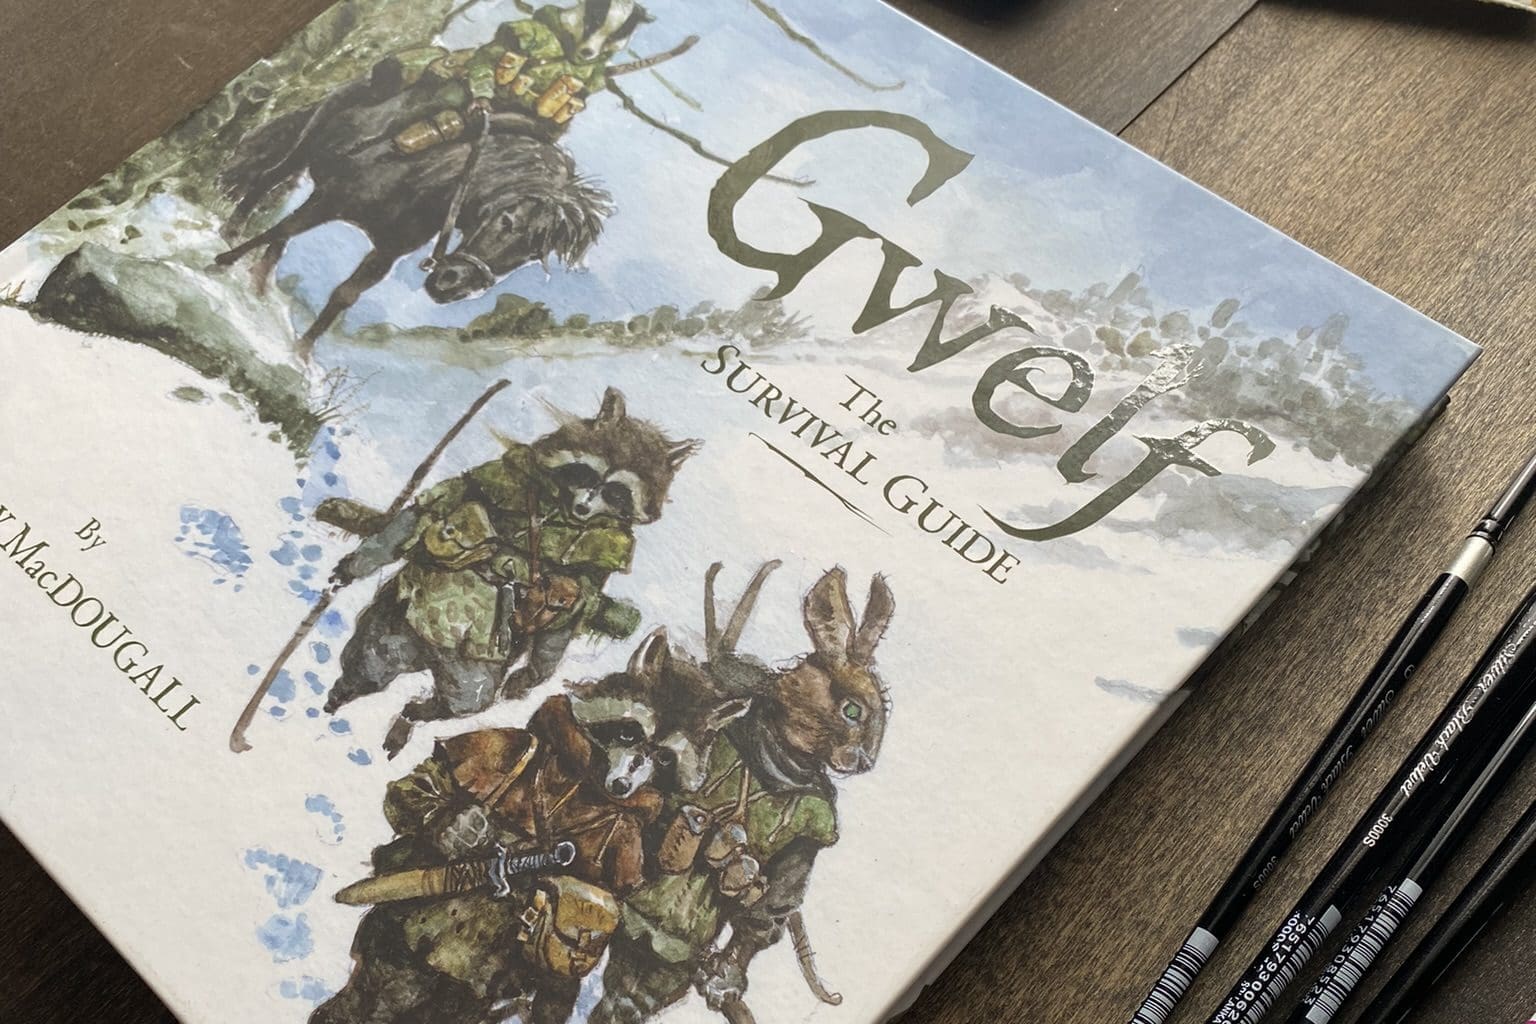 Larry MacDougall's book. Gwelf: The Survival Guide